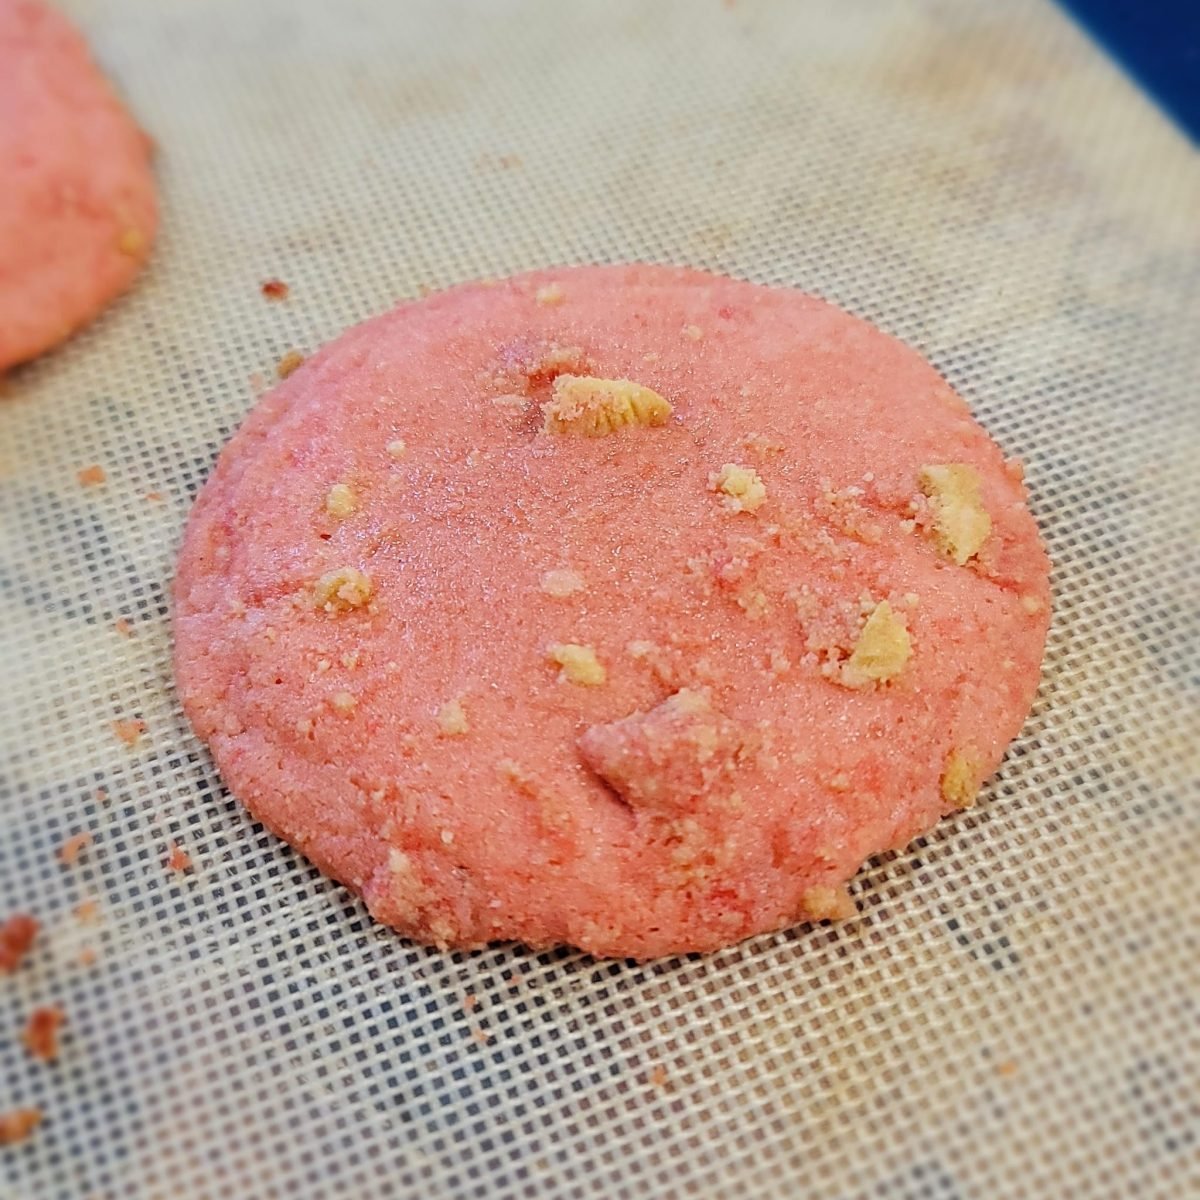 cookied baked after strawberry cookie rolled in crushed strawberry crunch topping